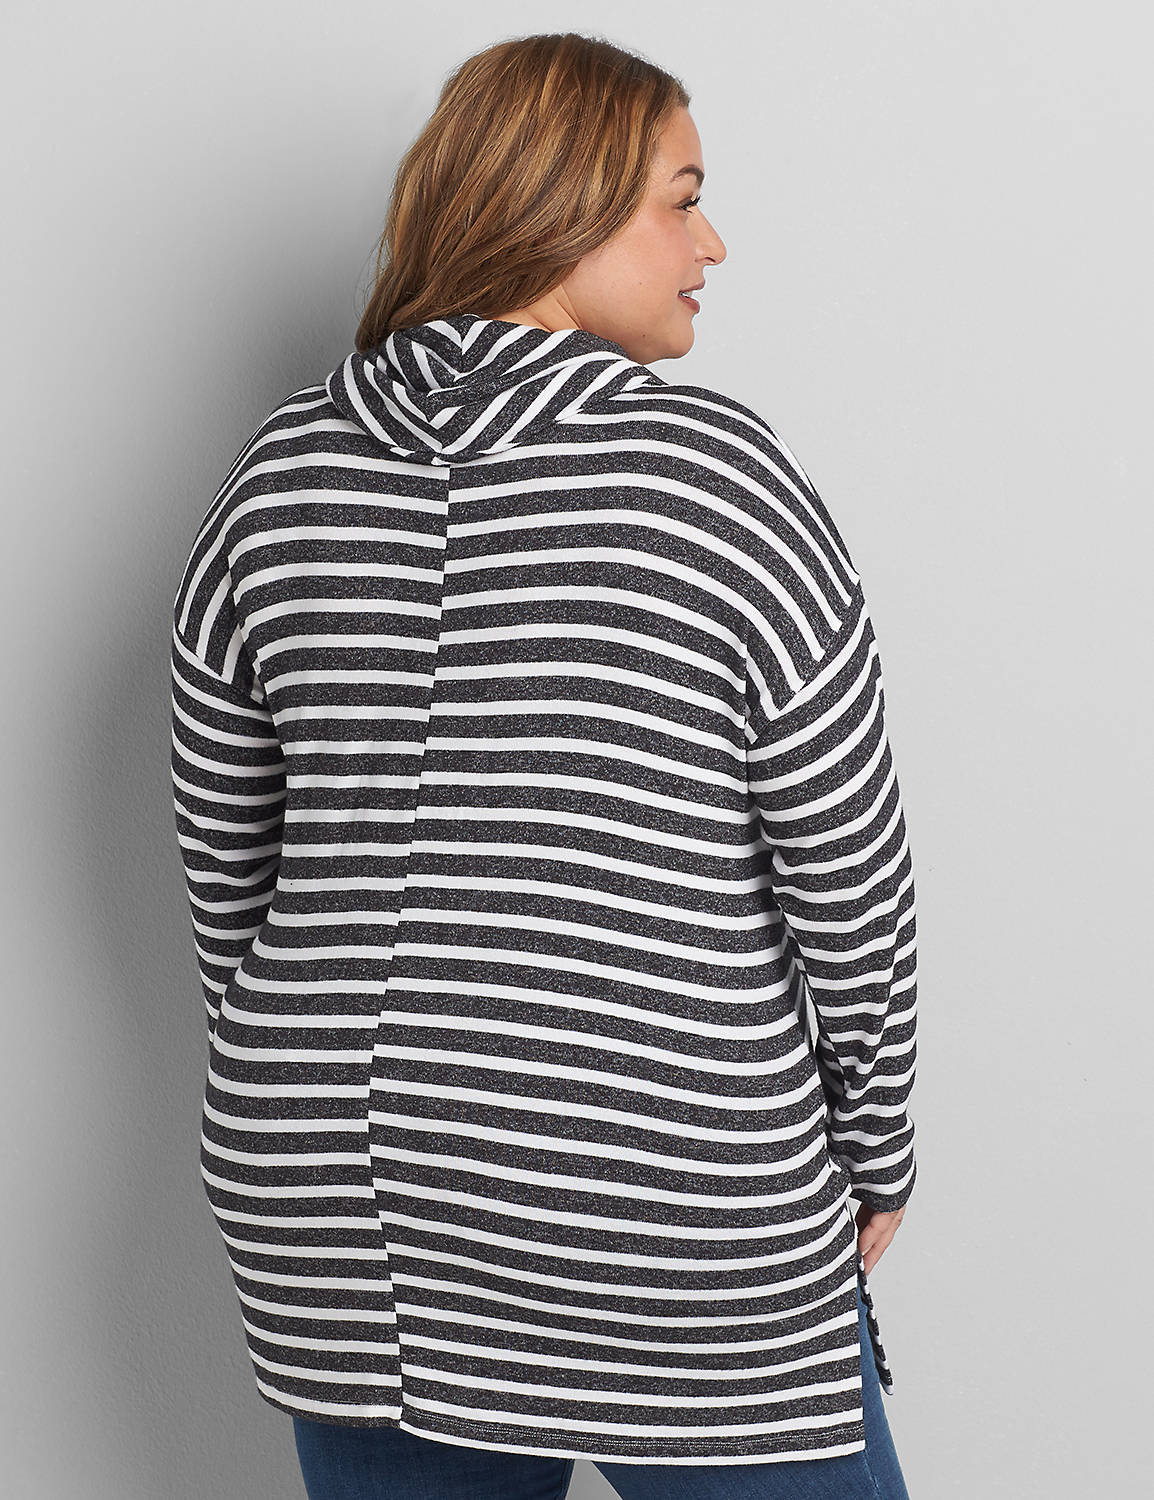 Long Sleeve Cowl Neck Texture Stripe Tunic F 1117240:LBH20314_AliviaStripe_colorway2:14/16 Product Image 2